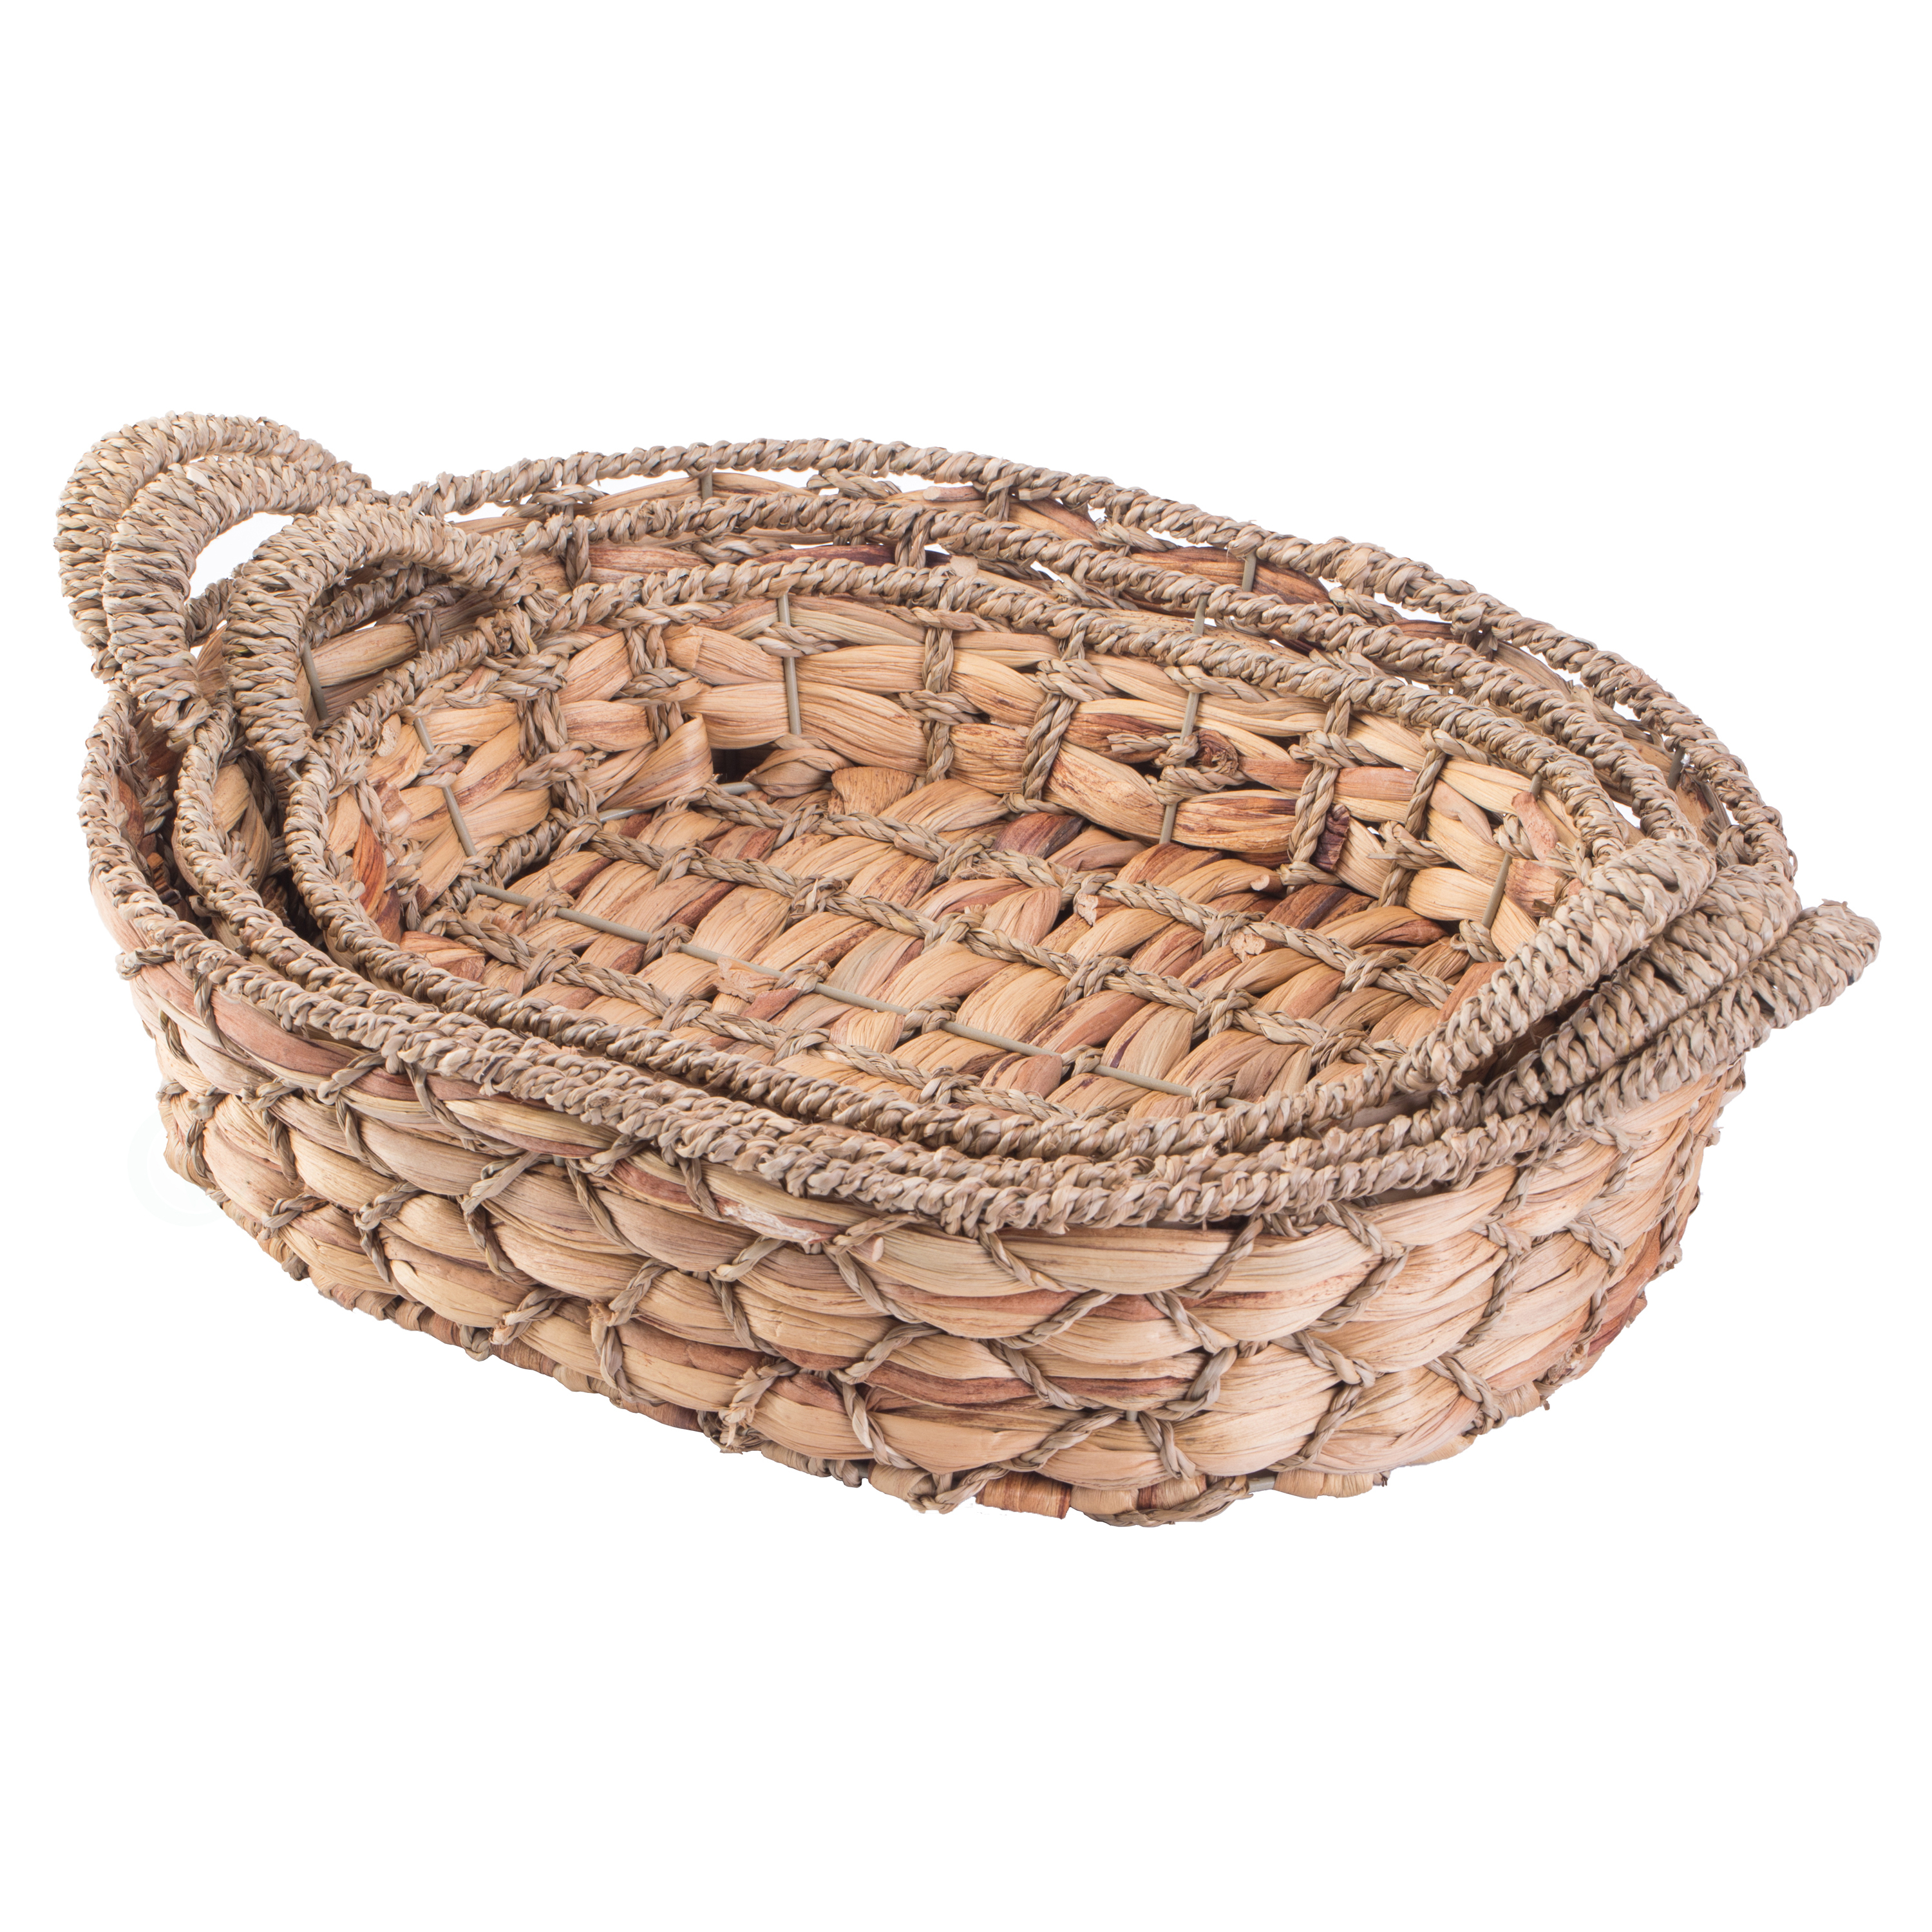 Seagrass Fruit Bread Basket Tray With Handles - Set Of 4 Large